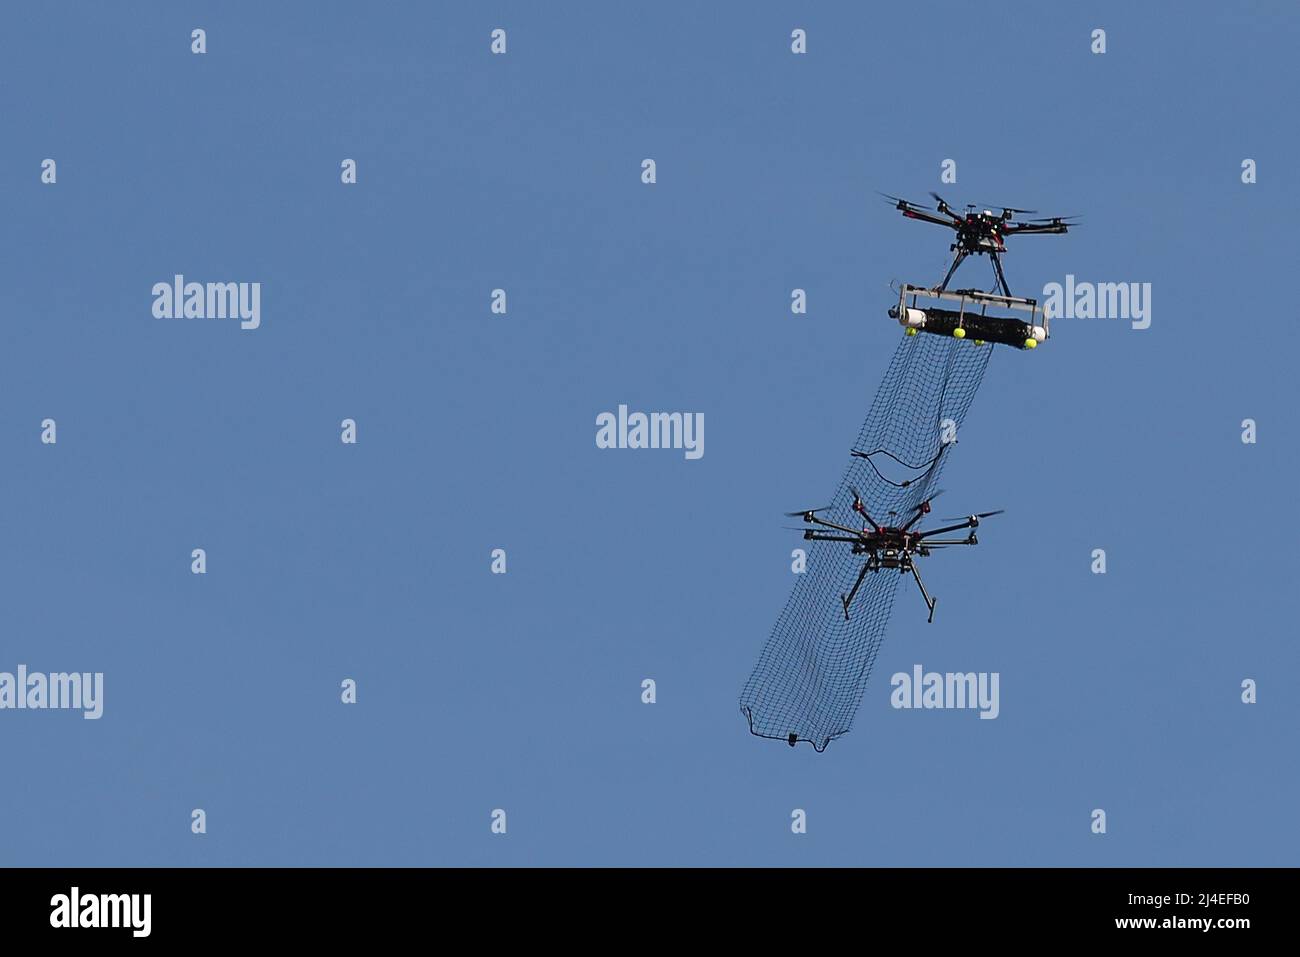 An attack drone with attached net, part of the counter-unmanned aerial system developed by the team from Wright-Patterson Air Force Base, Ohio, intercepts a DJI S1000 drone with its net during the 2016 Air Force Research Laboratory Commanders Challenge at the Nevada National Security Site, Las Vegas, NV., Dec. 13, 2016. Teams were given six months to develop a complete counter-unmanned aerial system to aid in base defense. In addition to the attack drone, Wright-Patterson's system uses a camera and laser range finder to detect UAS devices. (U.S. Air Force photo by Wesley Farnsworth) Stock Photo